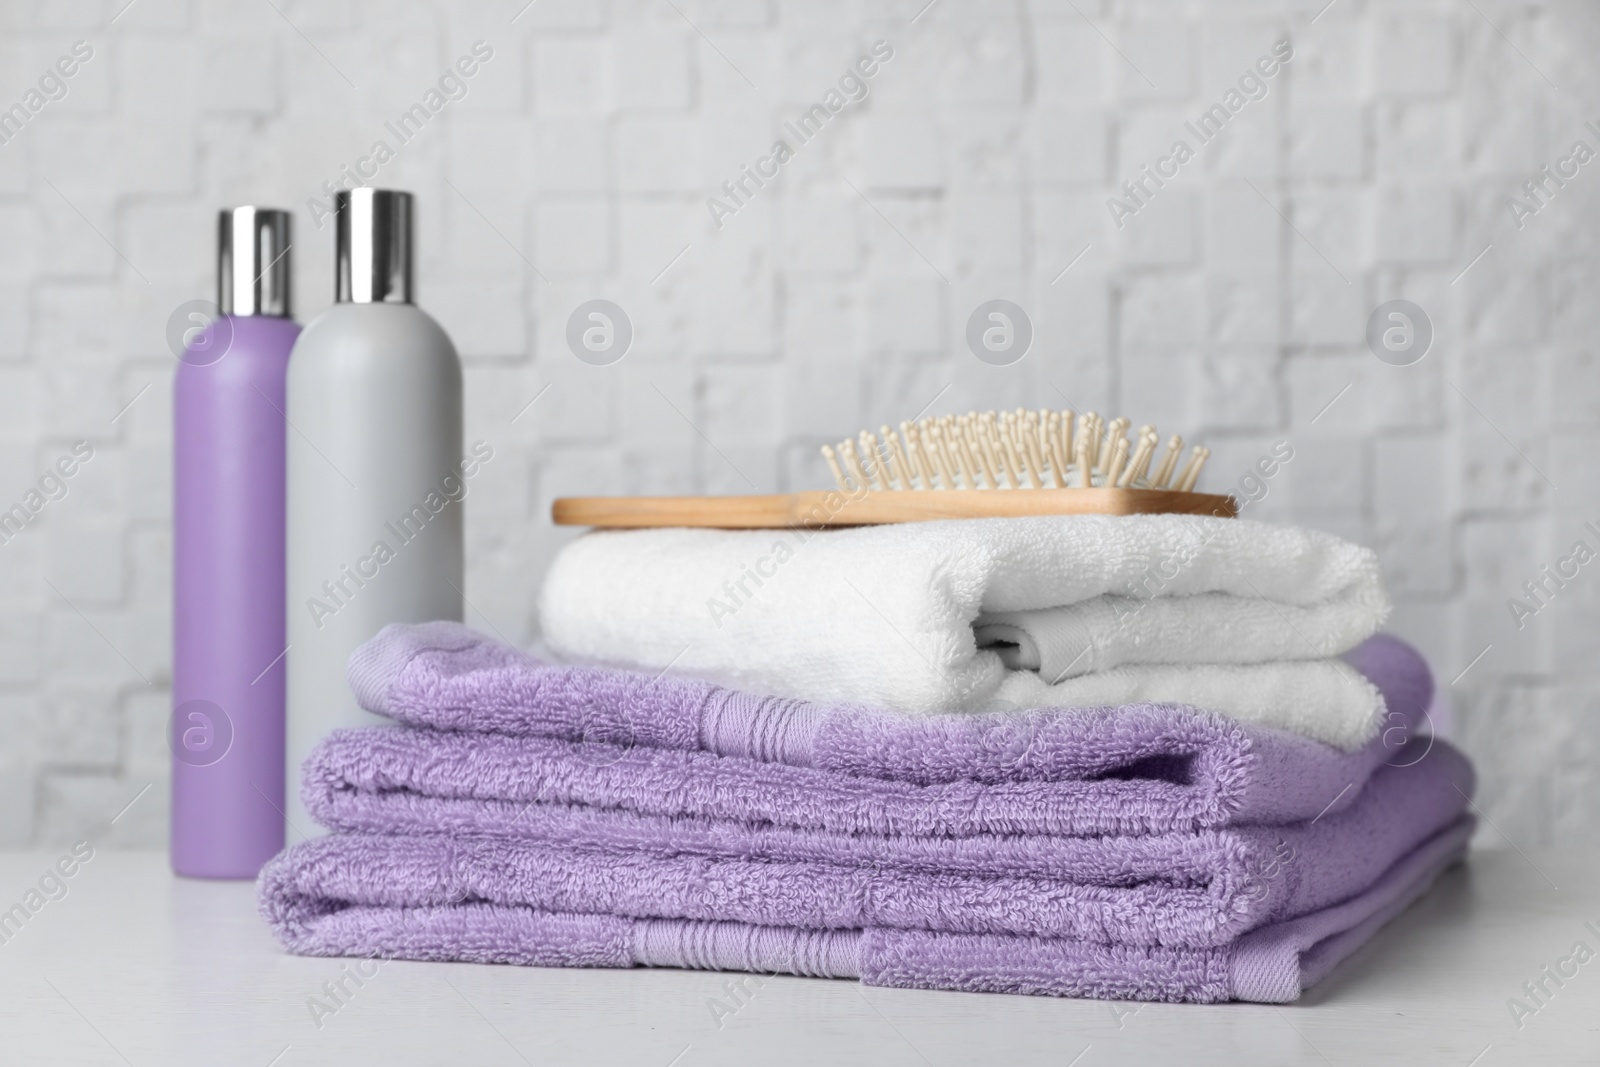 Photo of Folded towels, hair brush and shampoo on table against white wall.